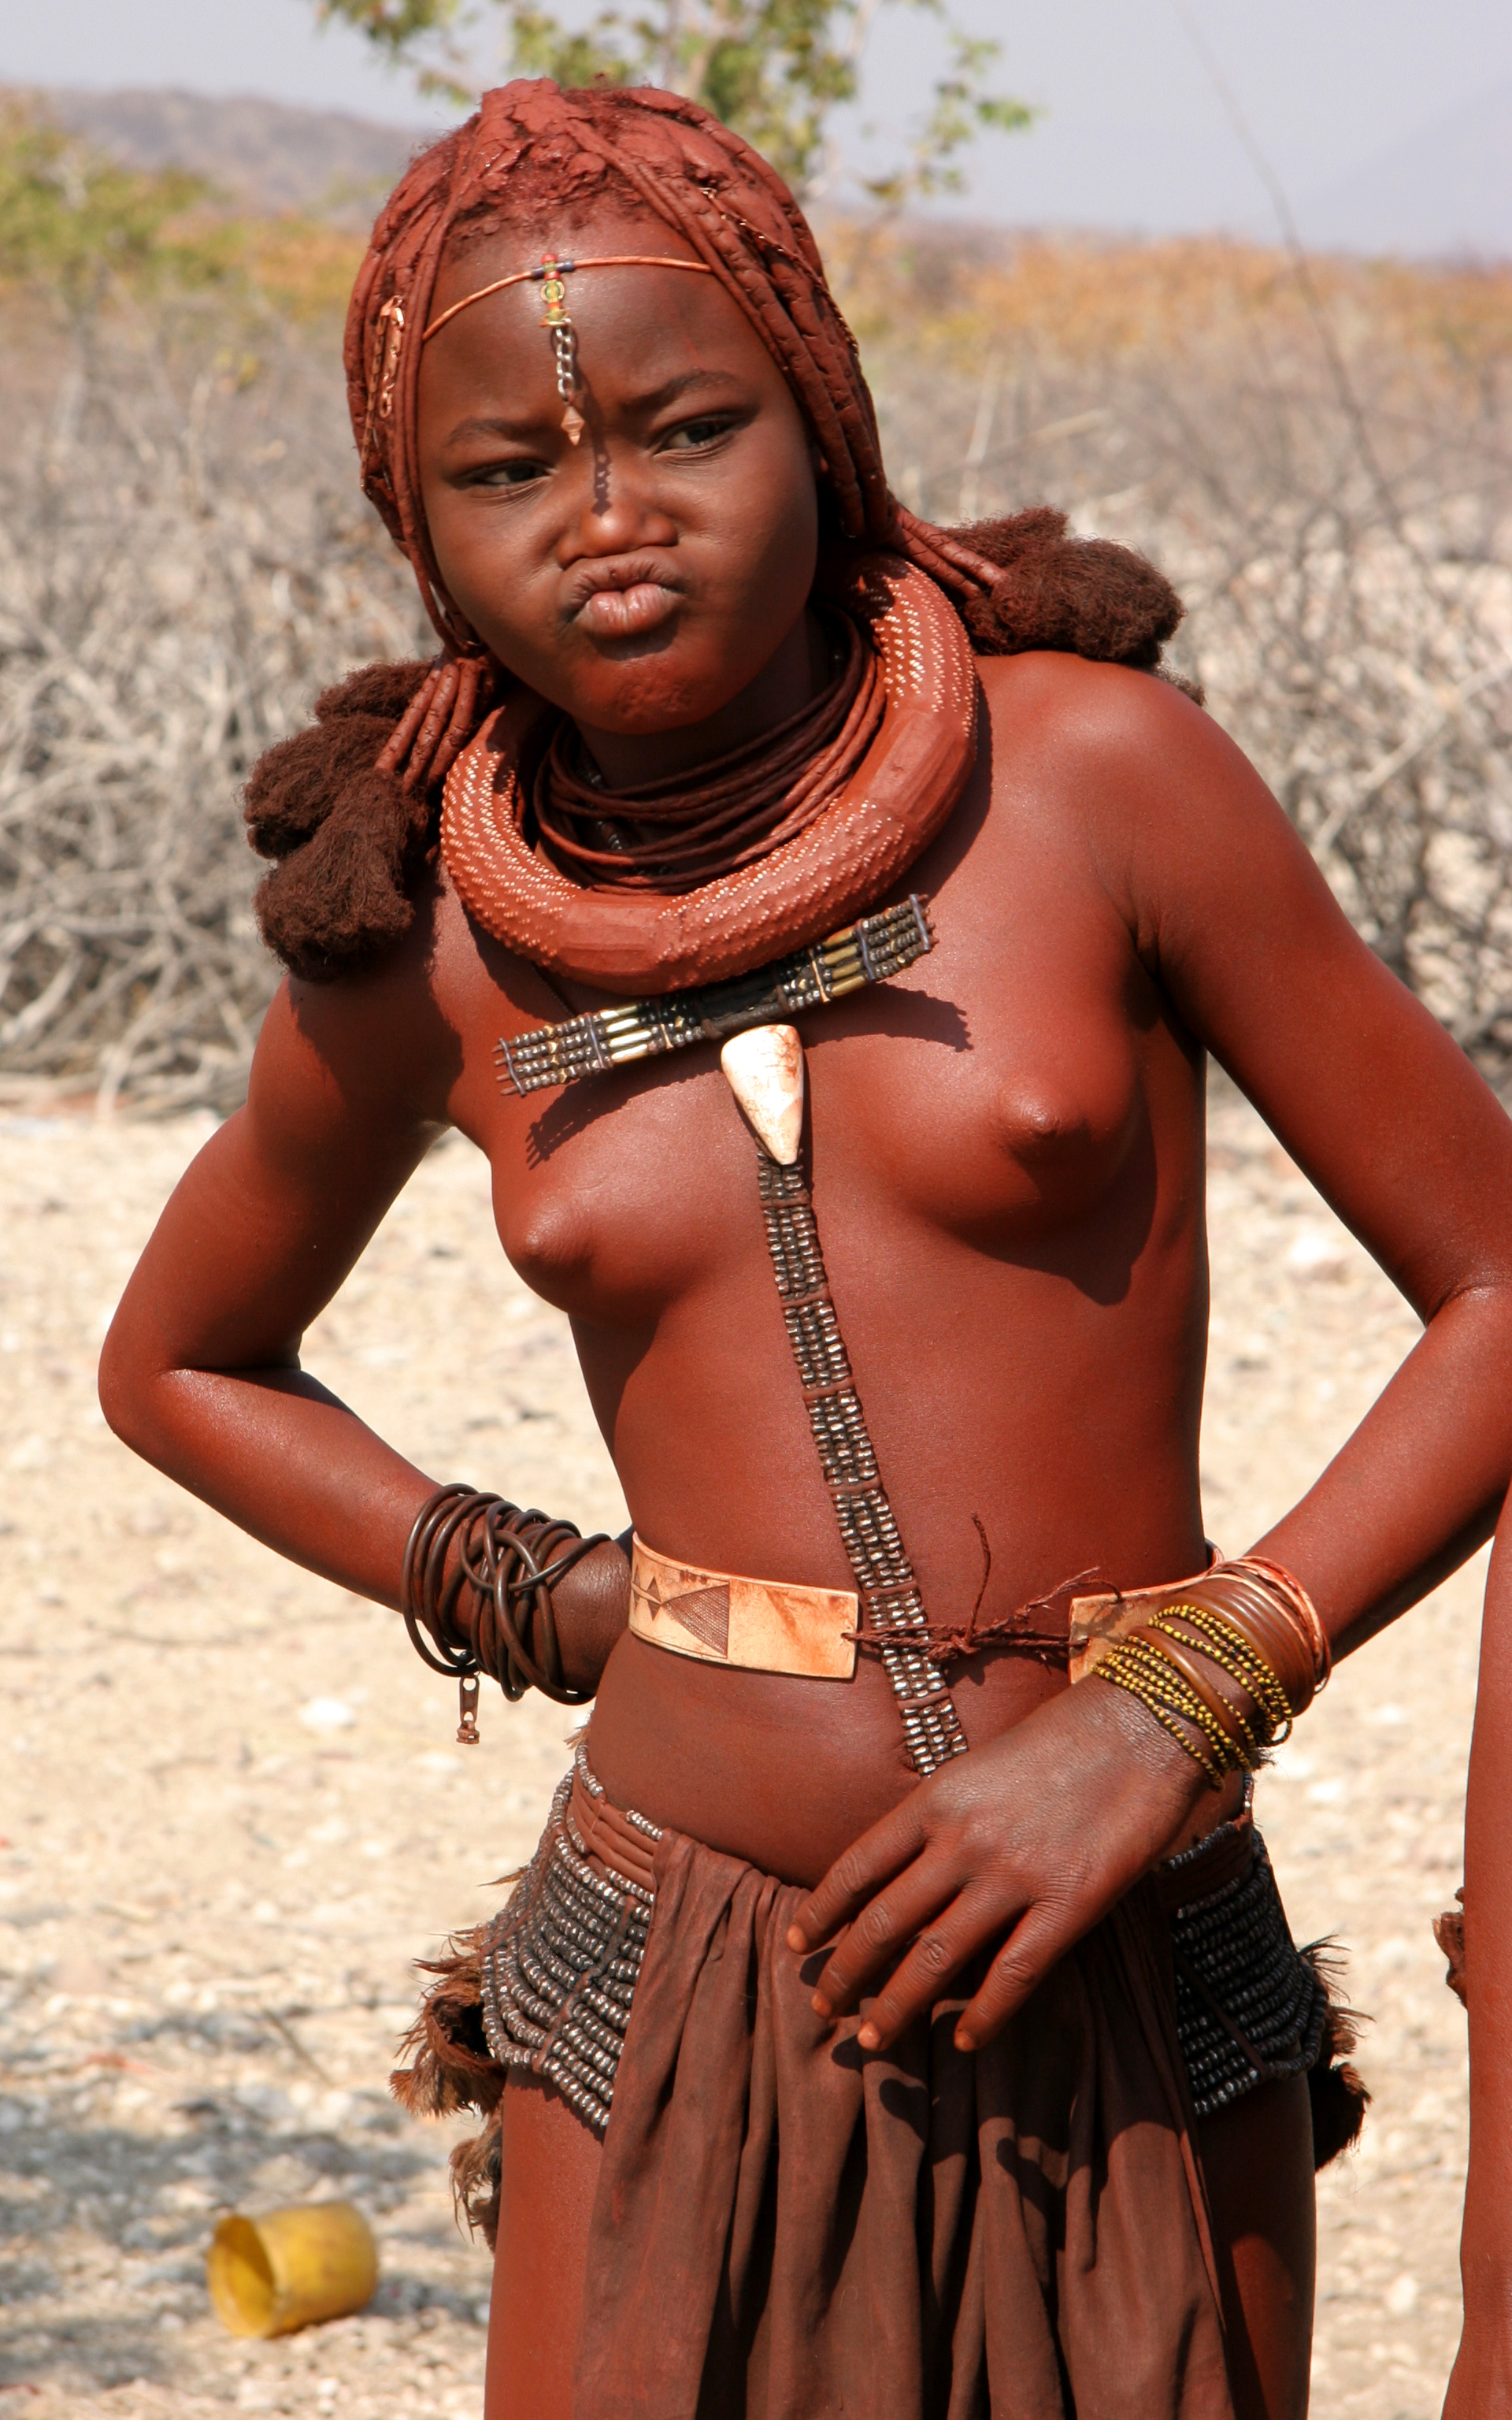 Young African Tribe Girls Порно.